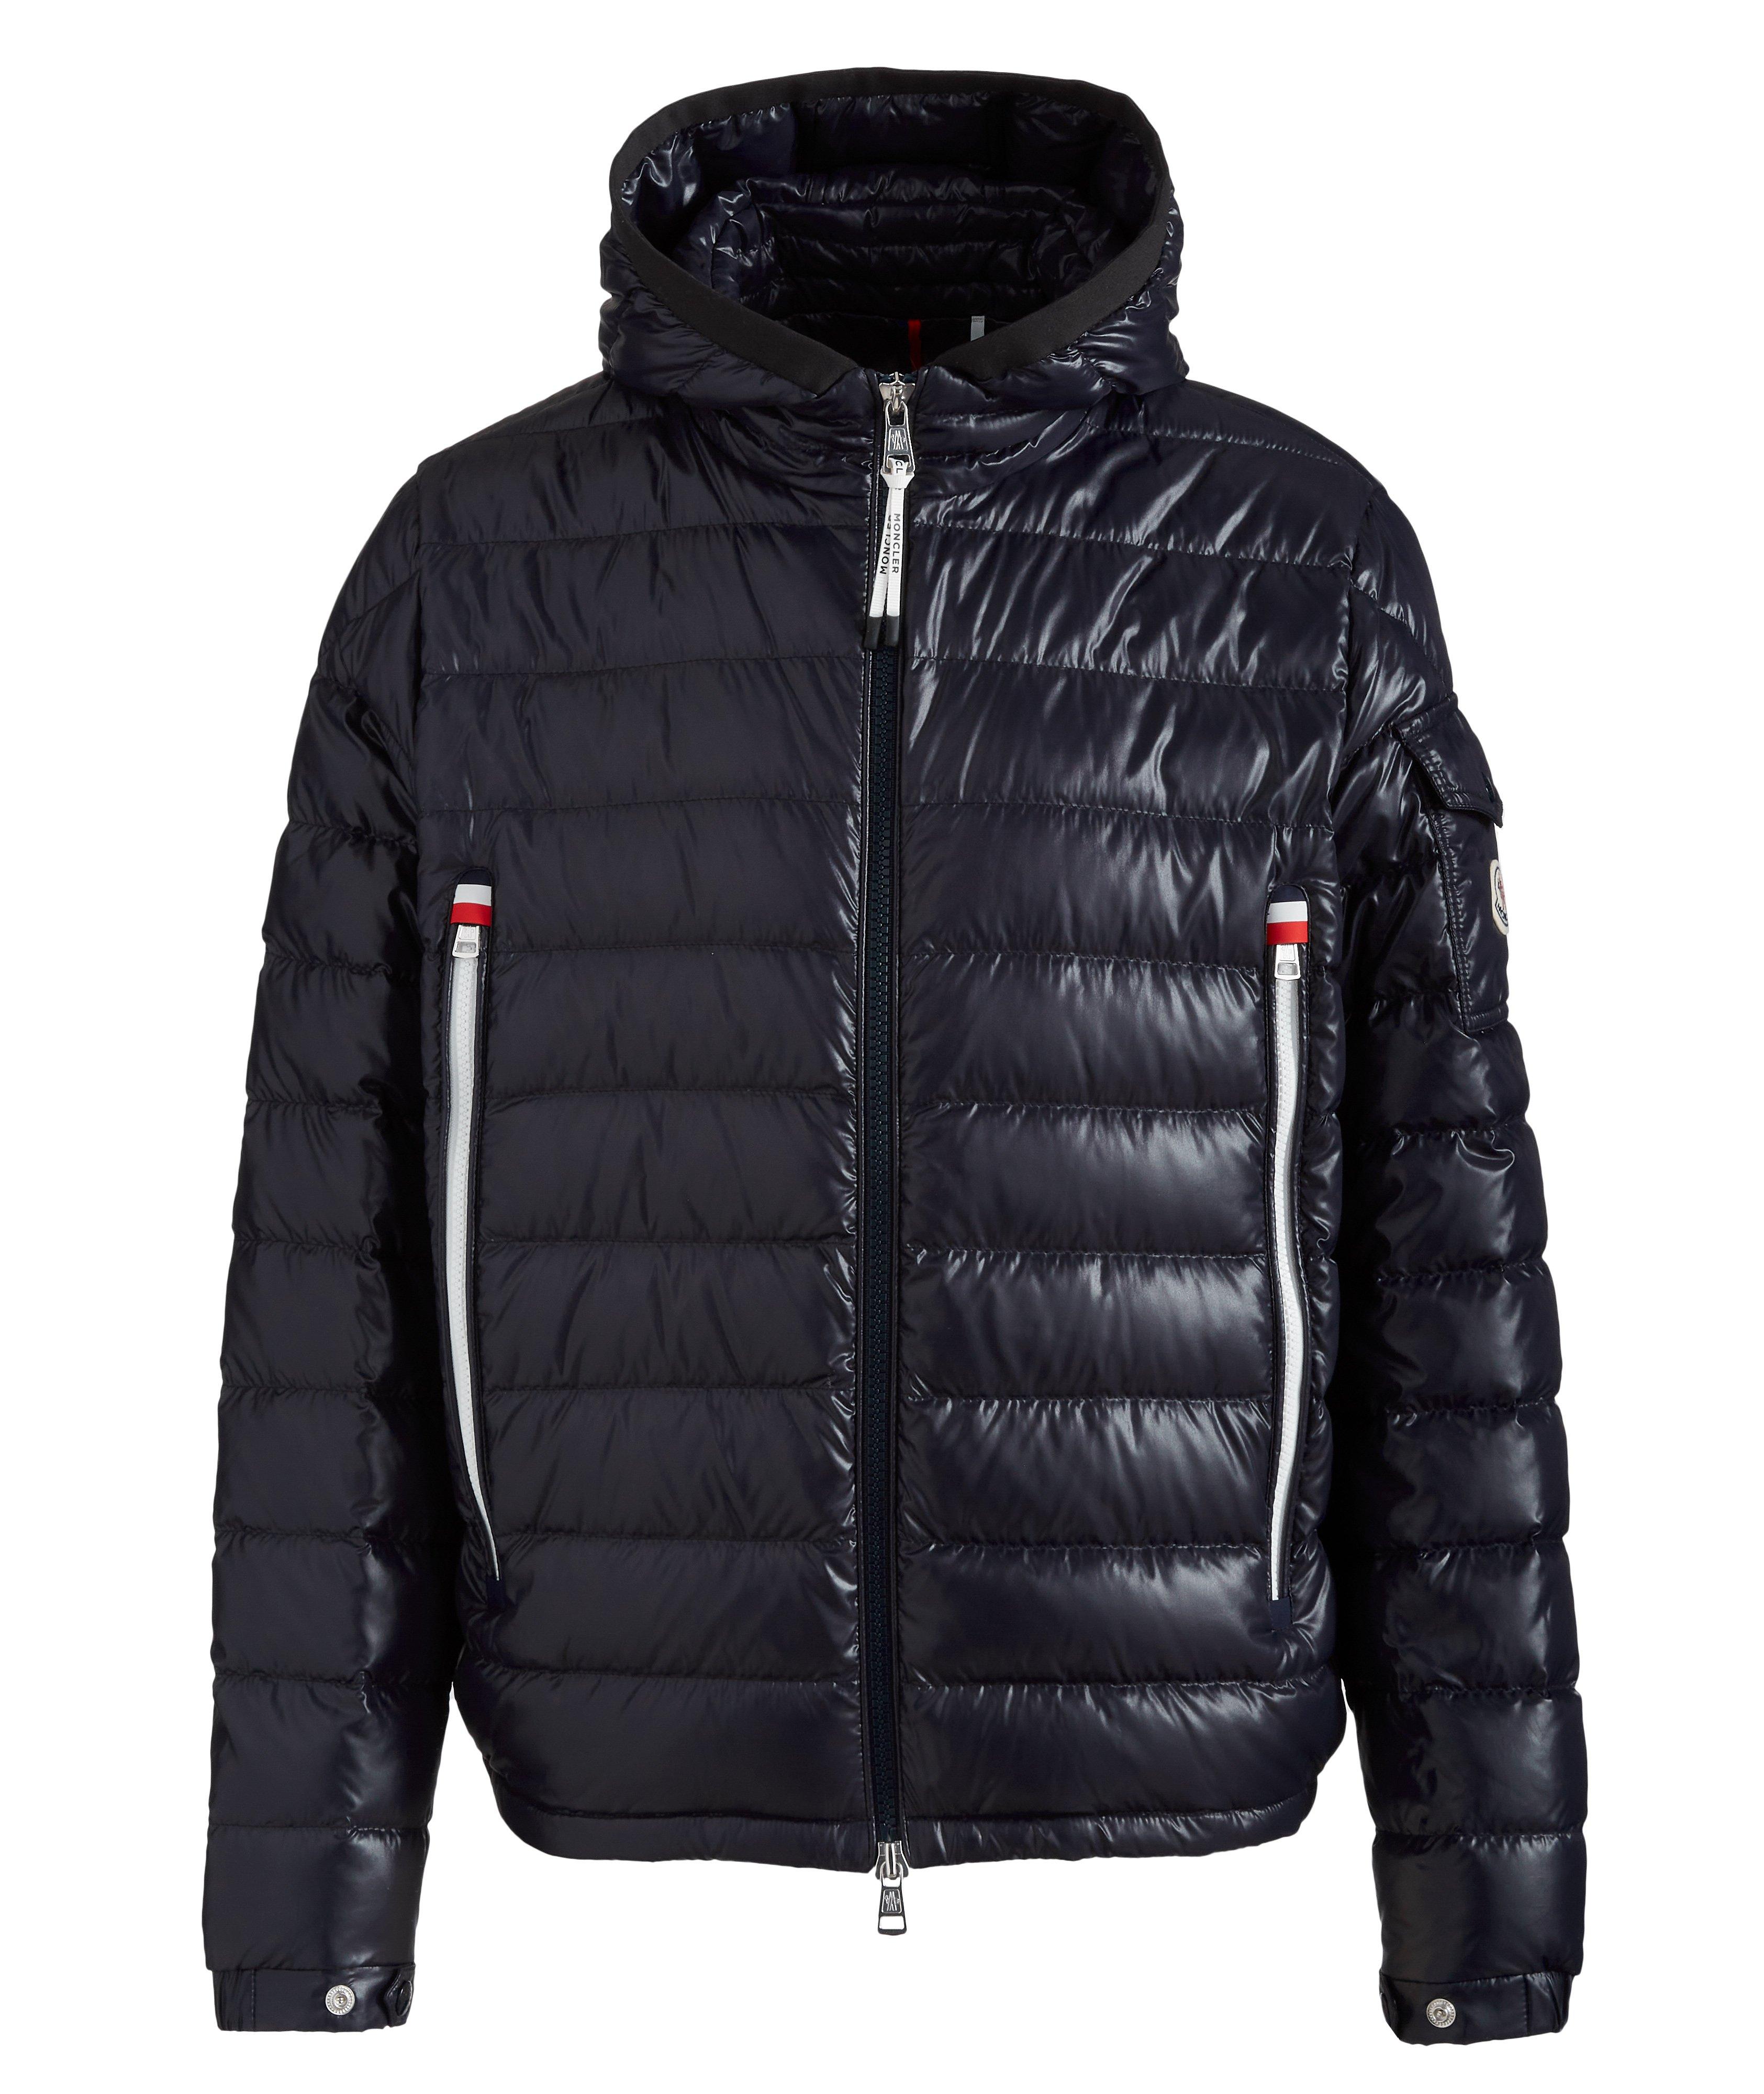 Galion Quilted Down Jacket image 0